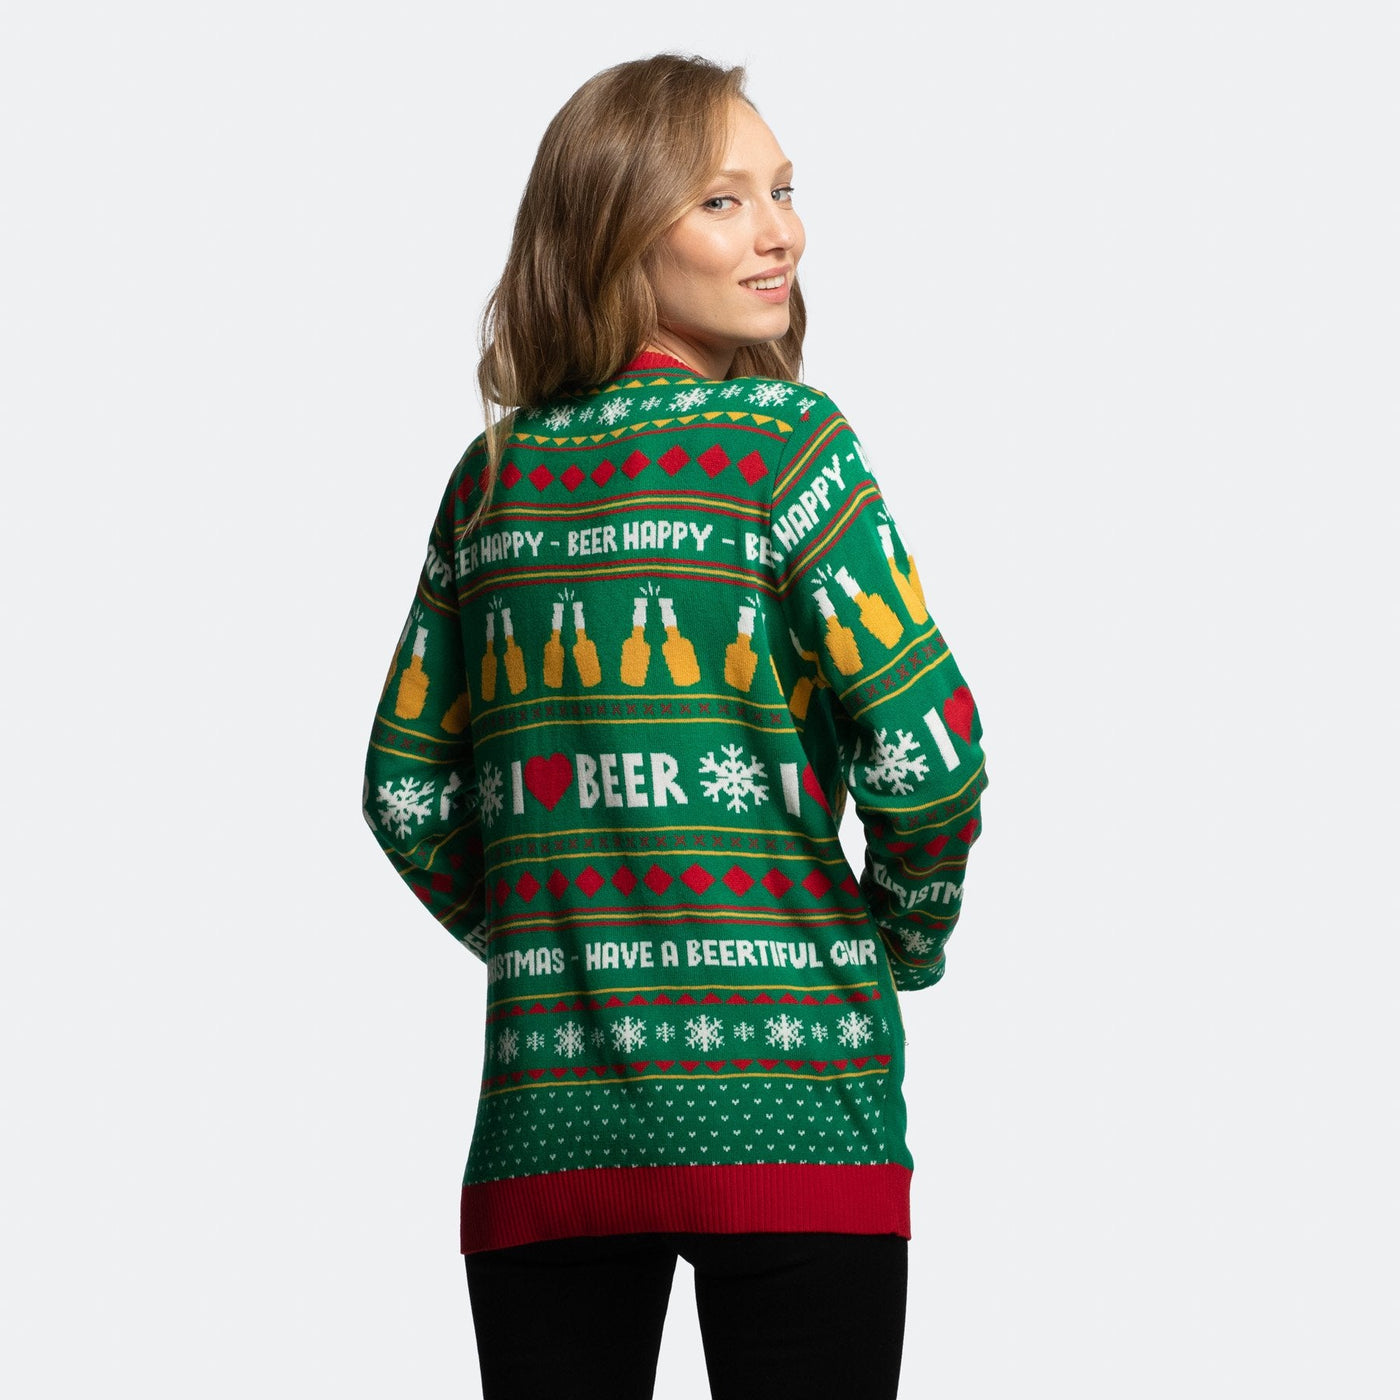 The Most Wonderful Time For A Beer Julesweater Dame